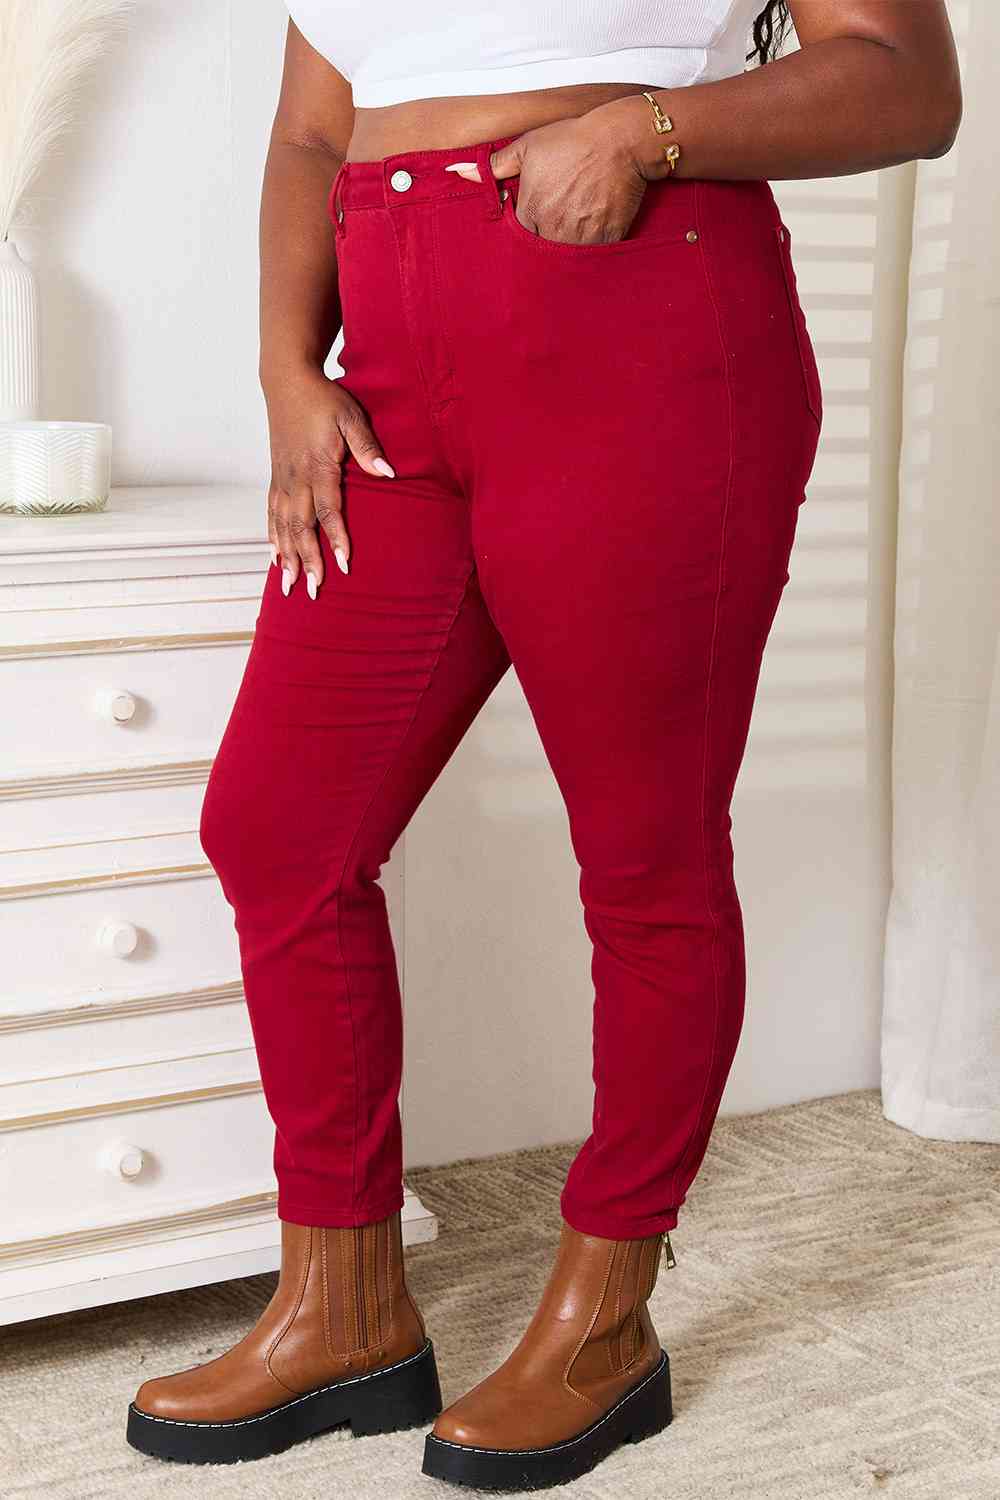 Judy Blue Red Skinny Jeans